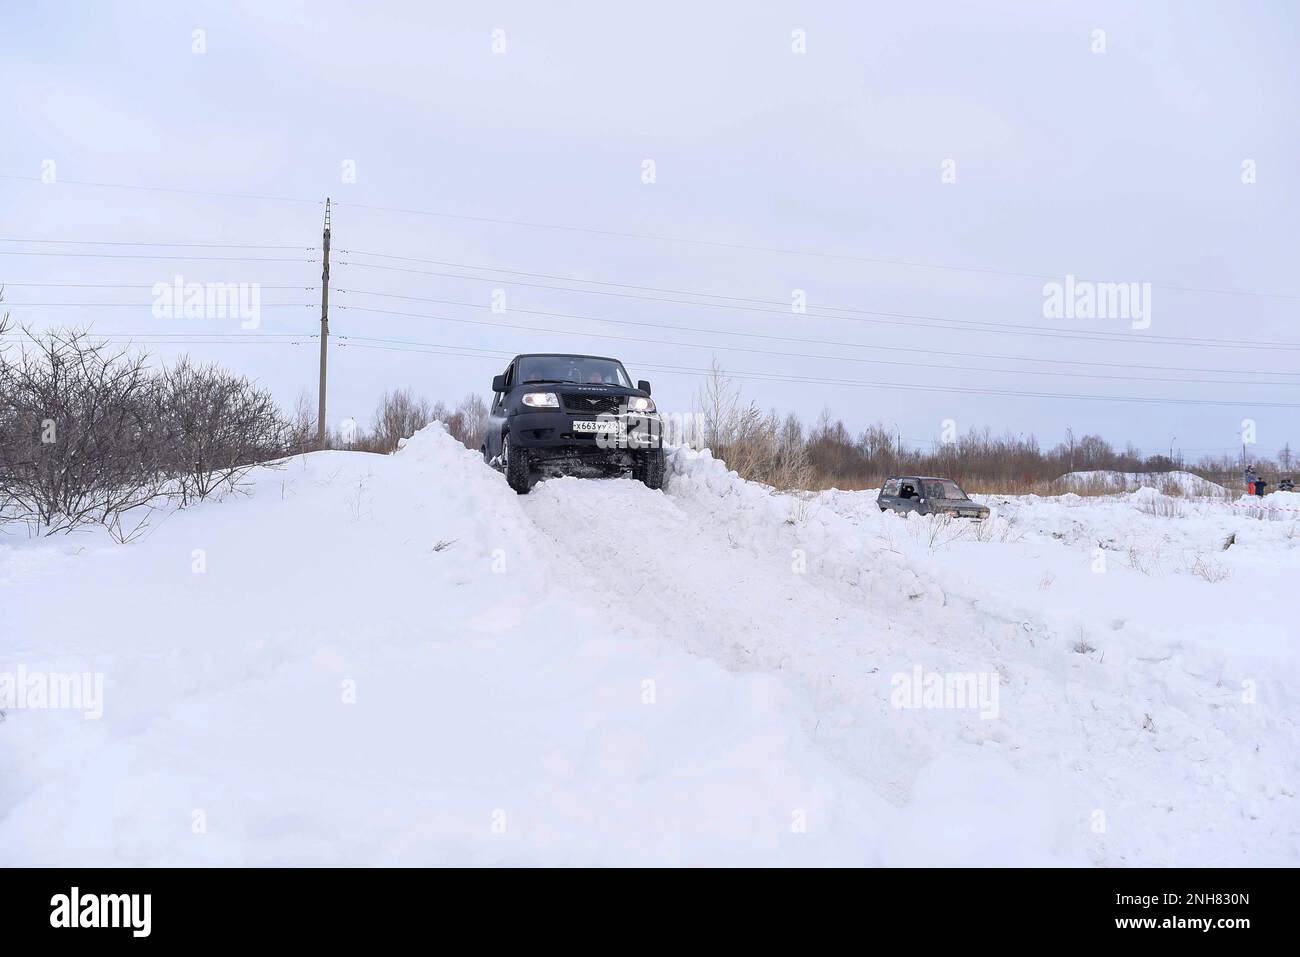 Russian SUV 'UAZ Patriot' quickly goes on a snowy road in the field in winter against the background of the forest clinging to the snowstorm wheel. Stock Photo